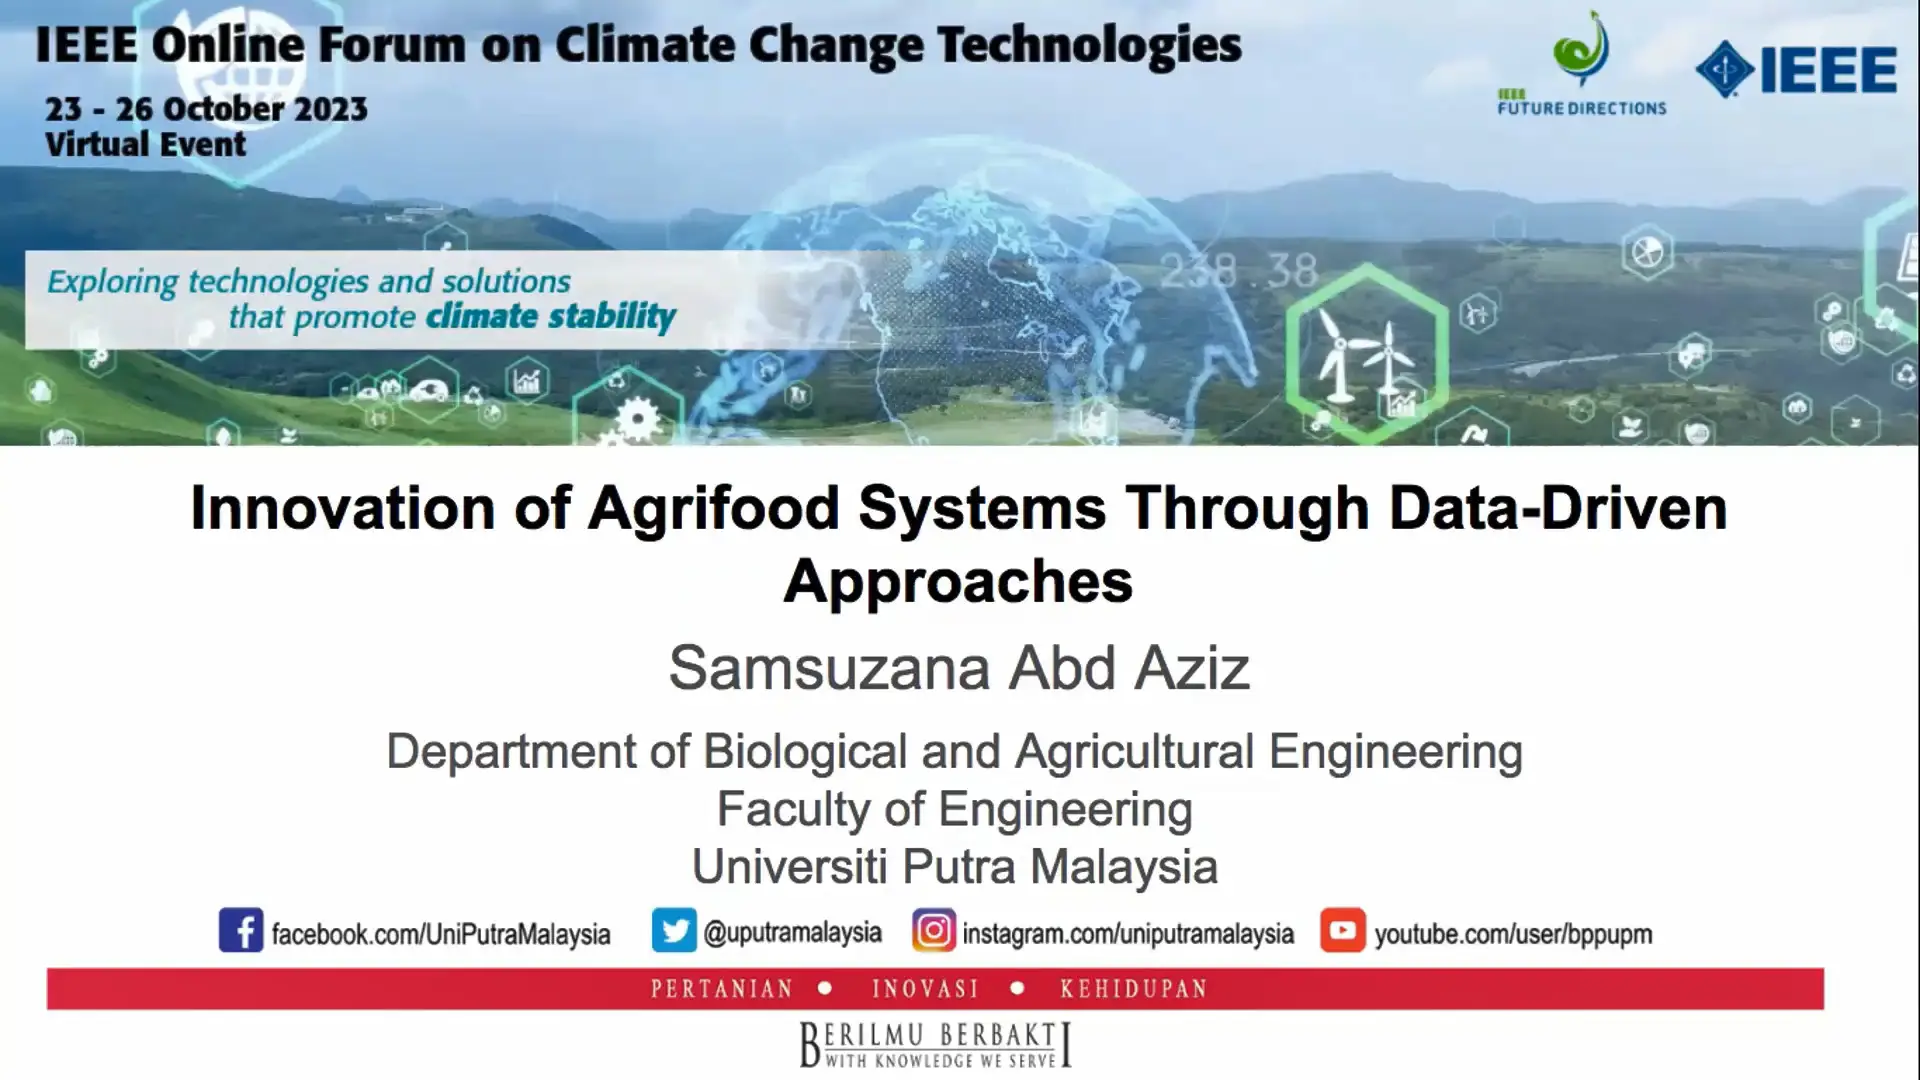 IEEE OFCCT 2023: Keynote 3.5: Innovation of Agrifood Systems through Data-Driven Approaches